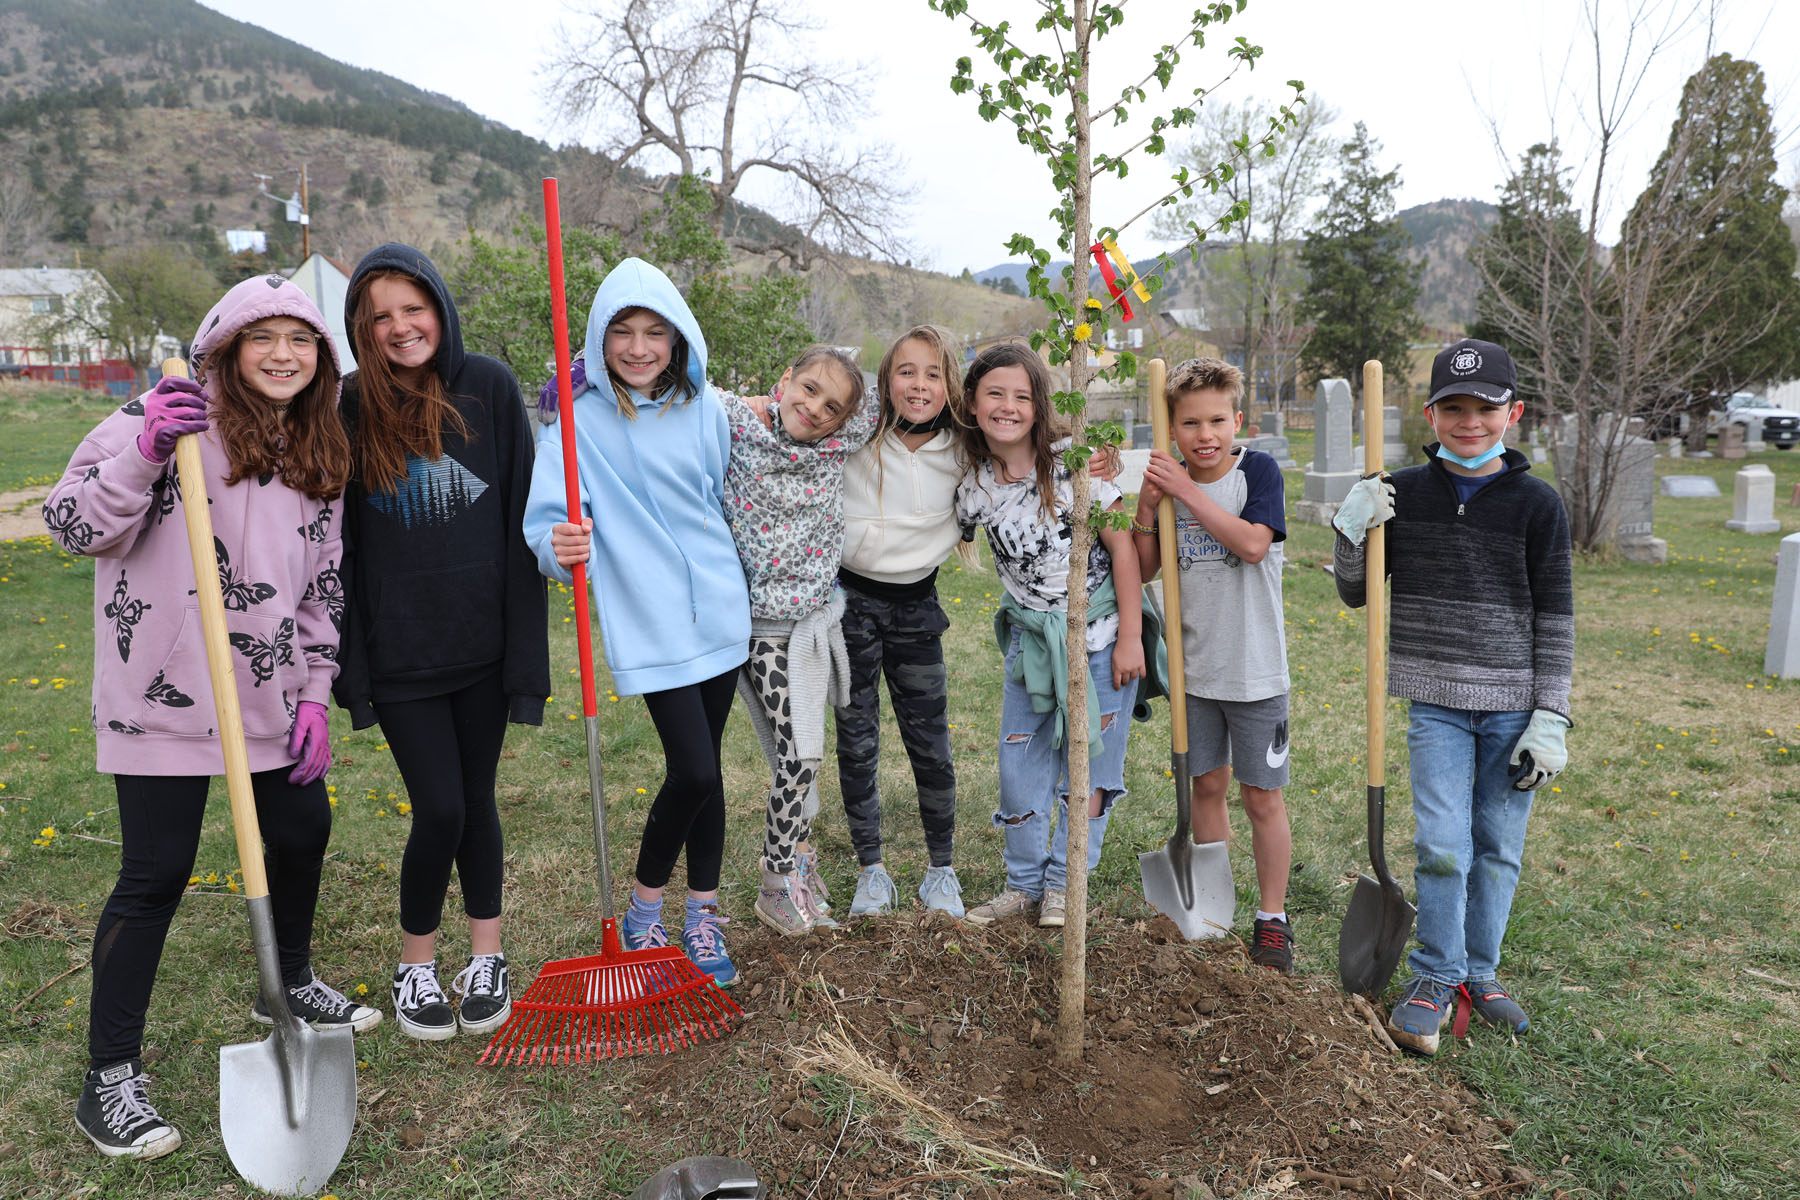 Arbor Day, Planting, Forestry, Tree, Kids, Community